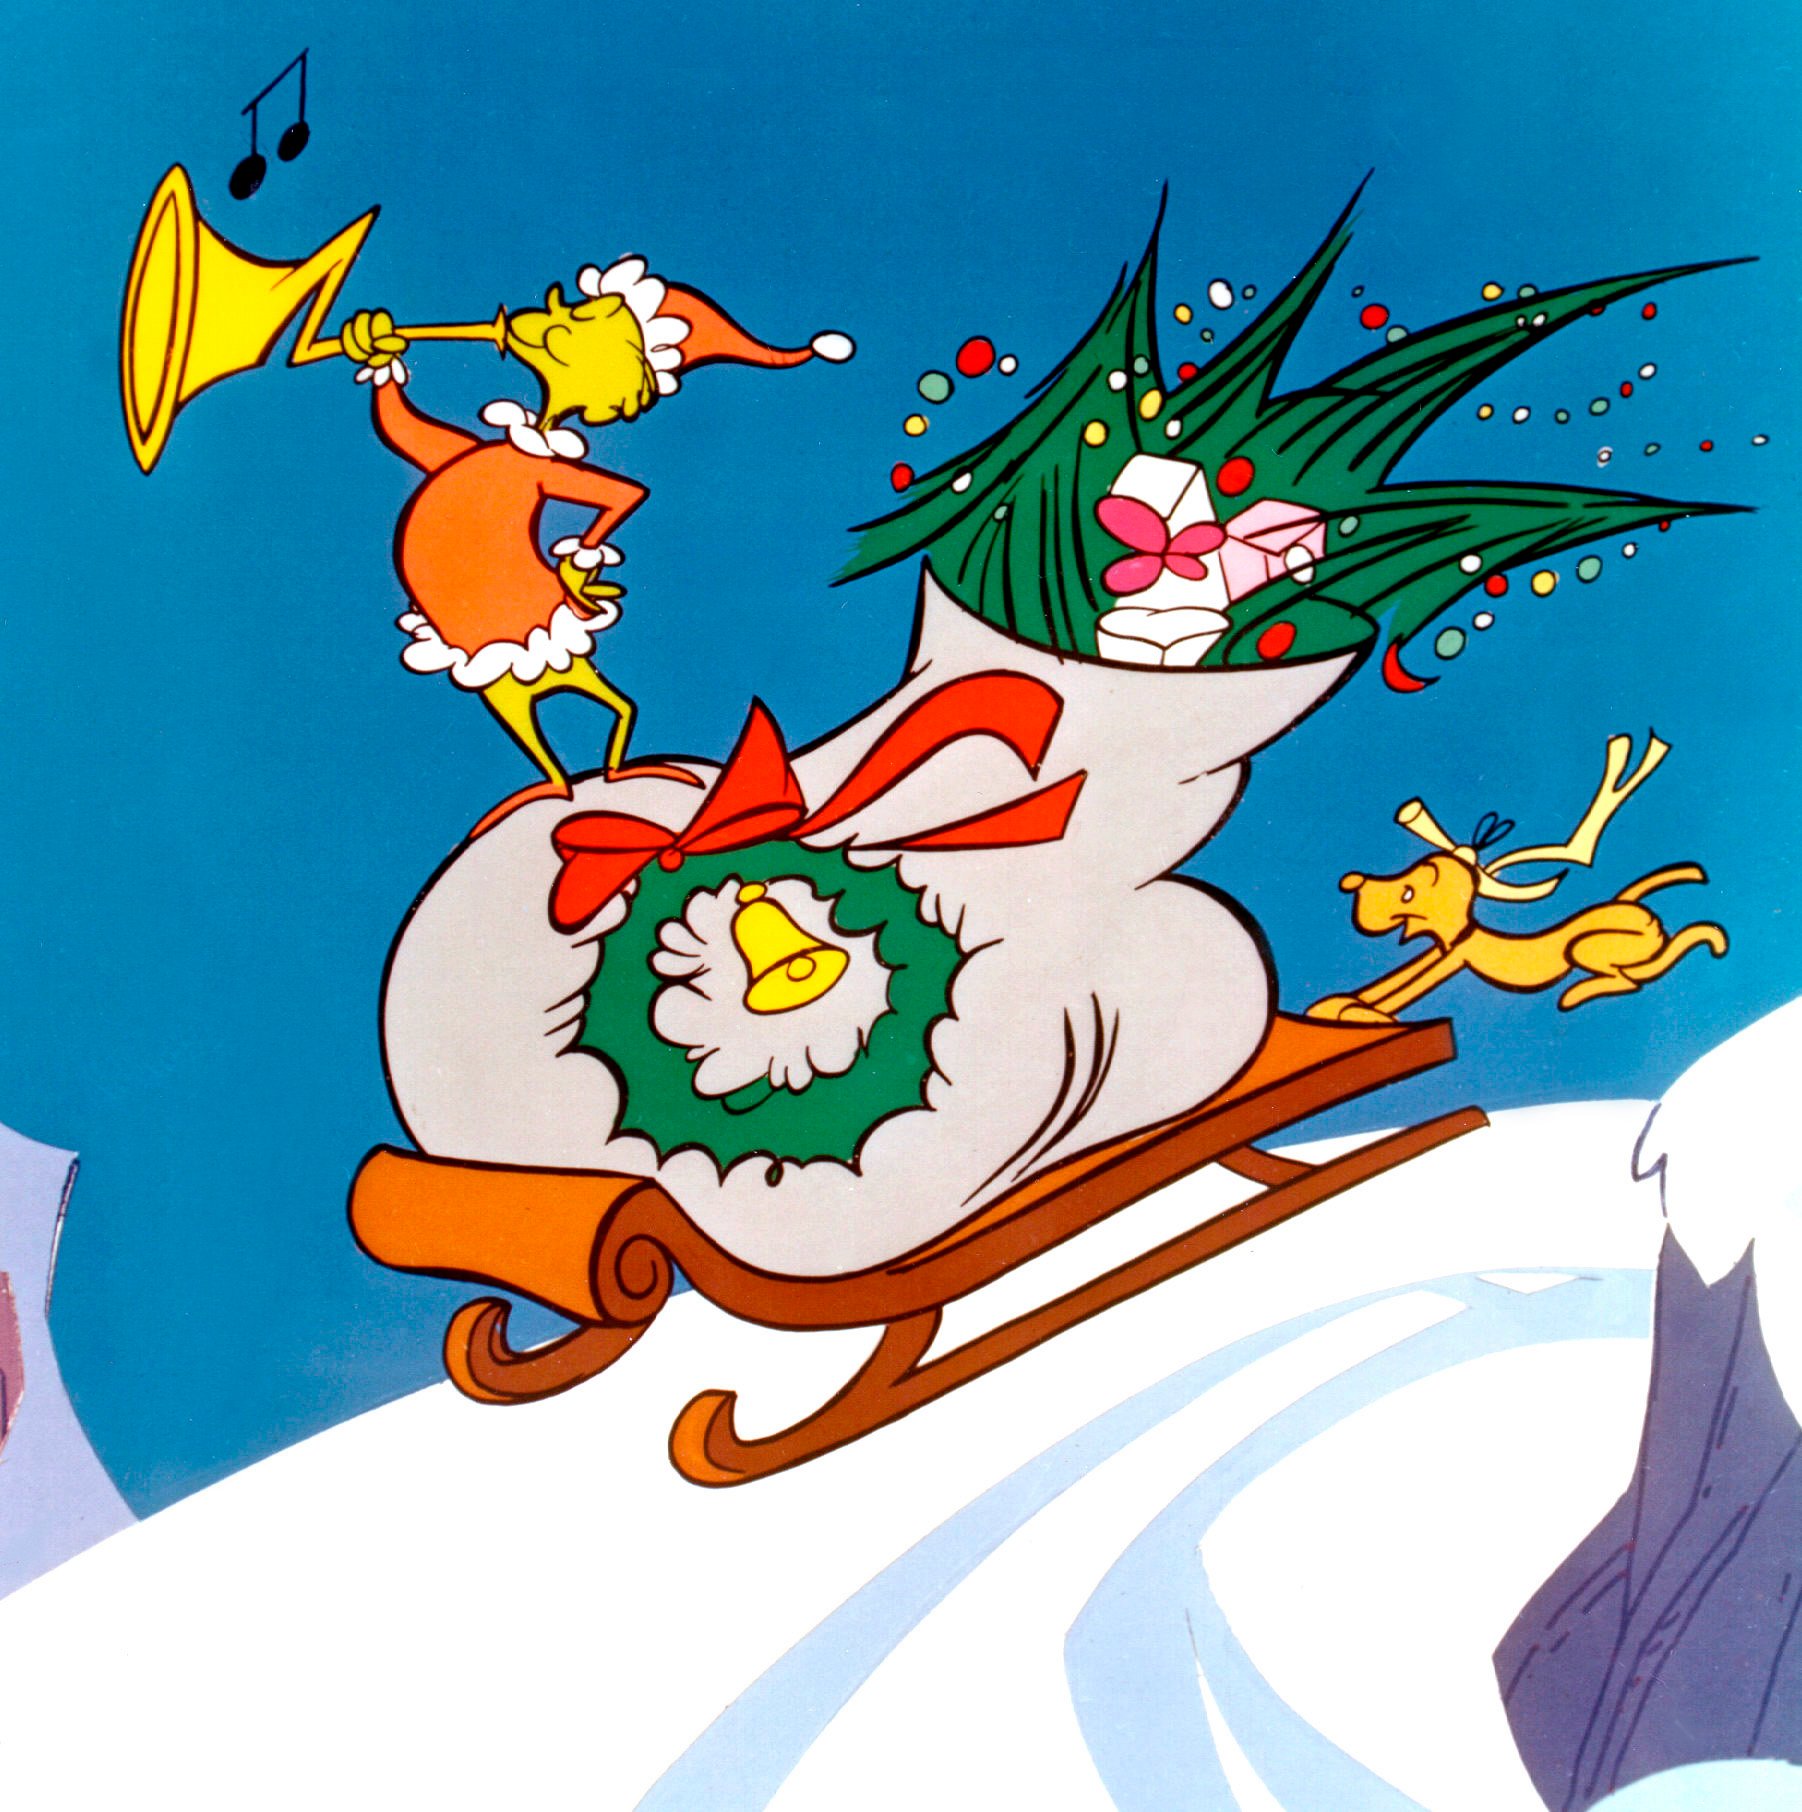 The Grinch on his sled in the 1966 version of 'How the Grinch Stole Christmas'